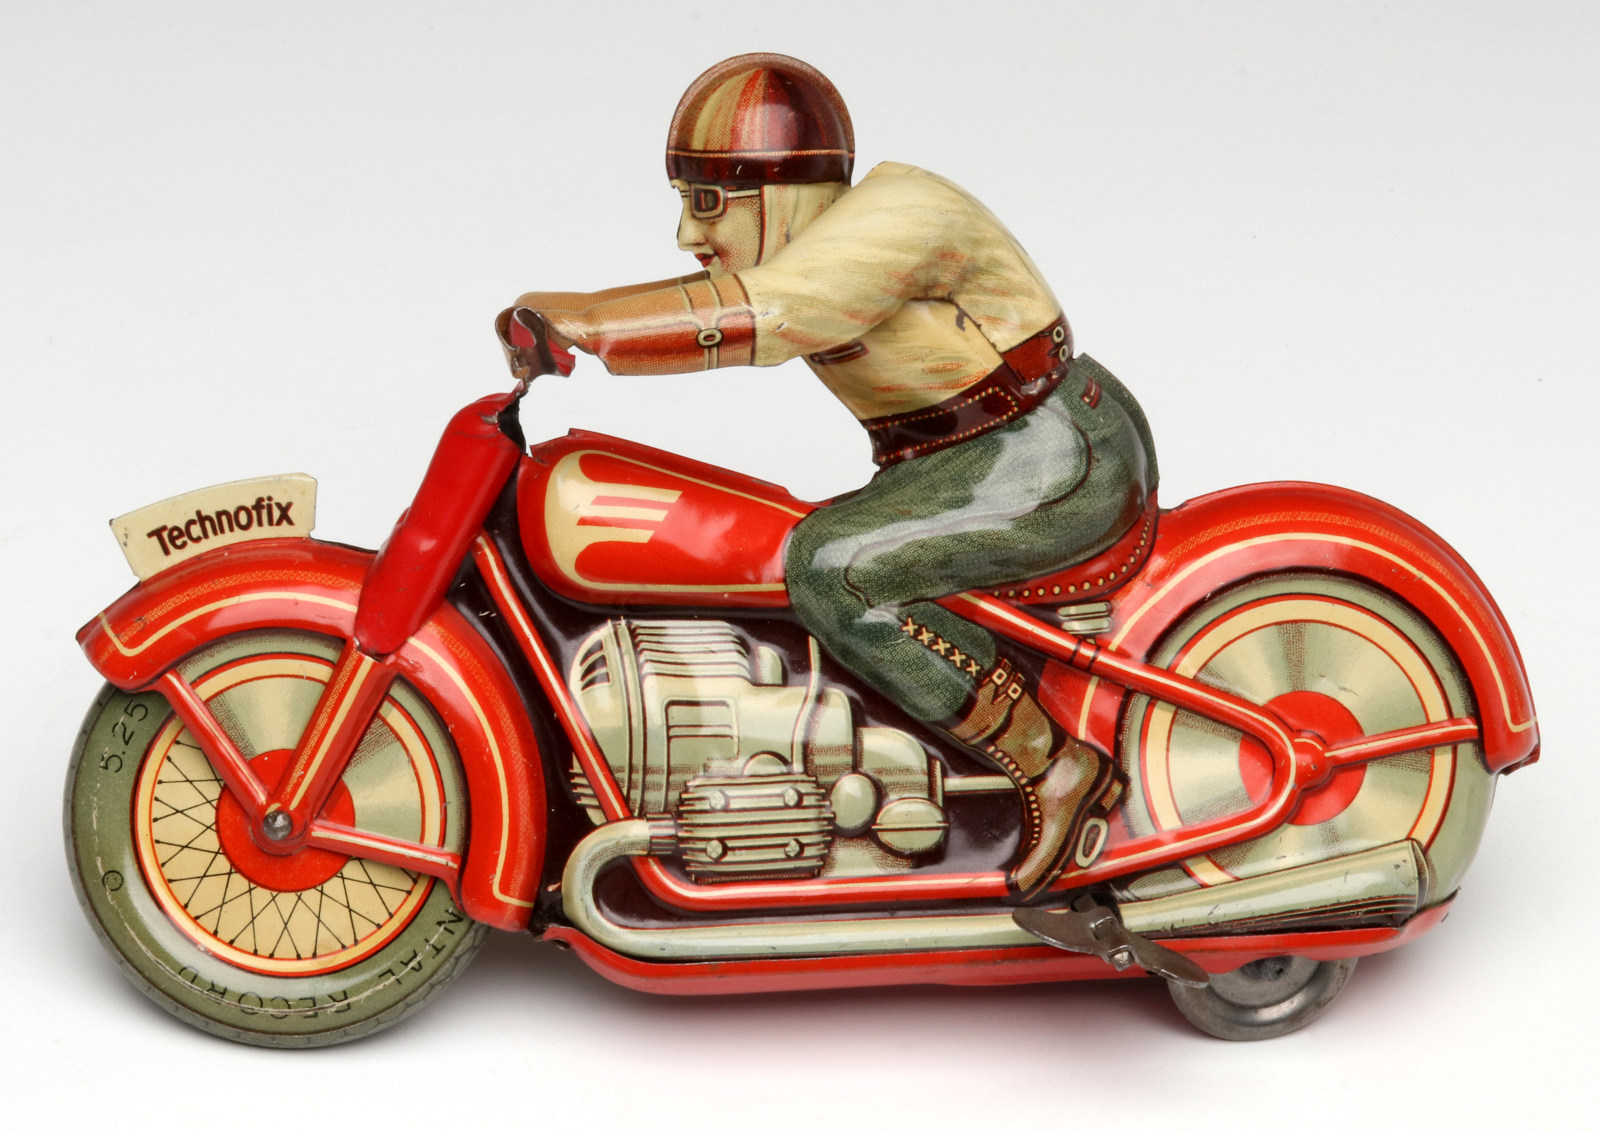 A TECHNOFIX LITHOGRAPHED TIN WIND UP MOTORCYCLE TOY